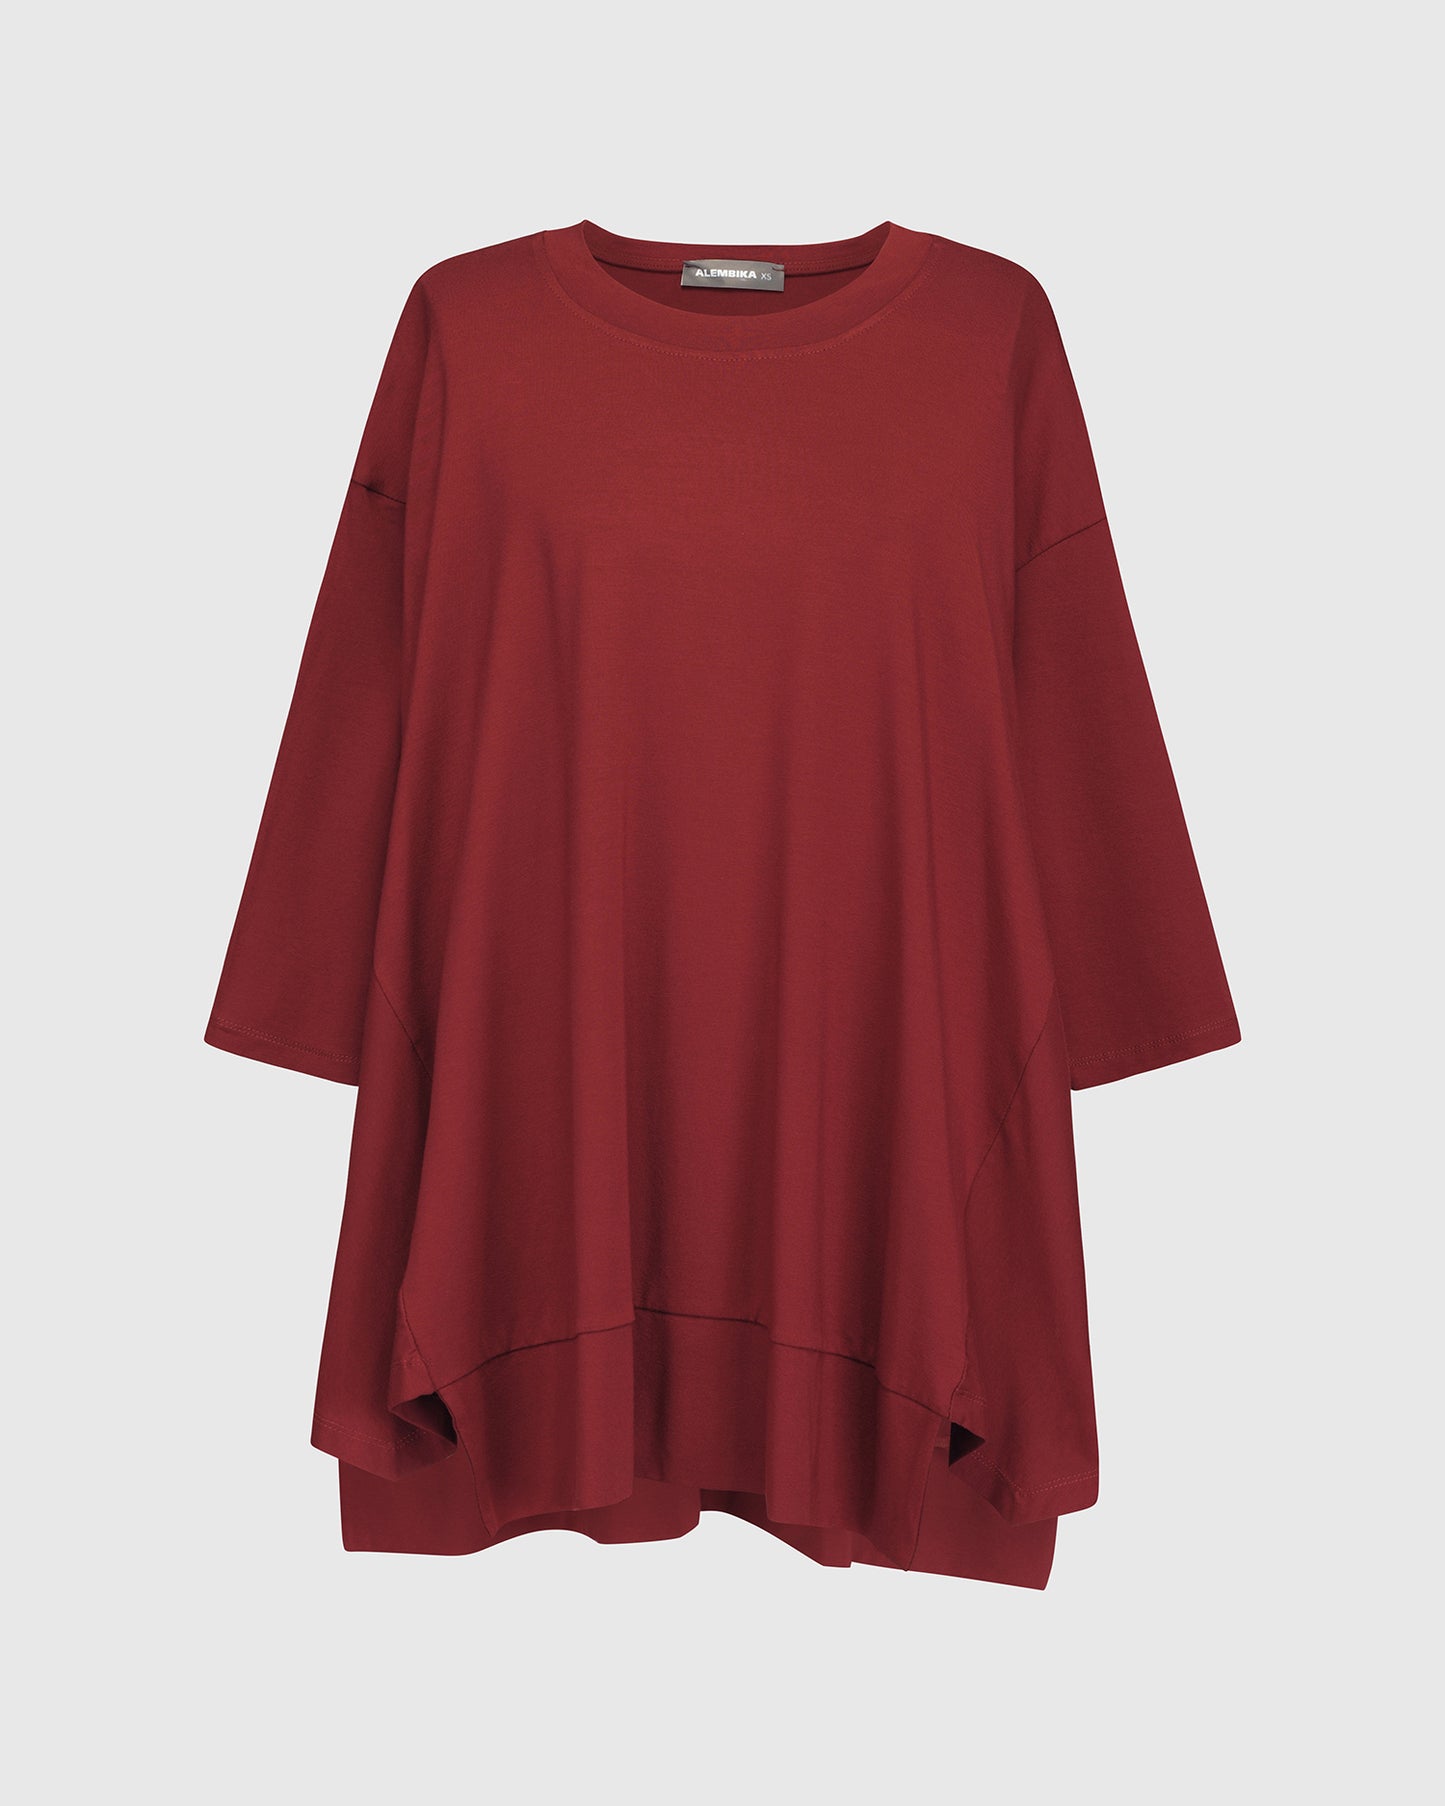 Essential Oversized Trapeze Top, Plum By Alembika